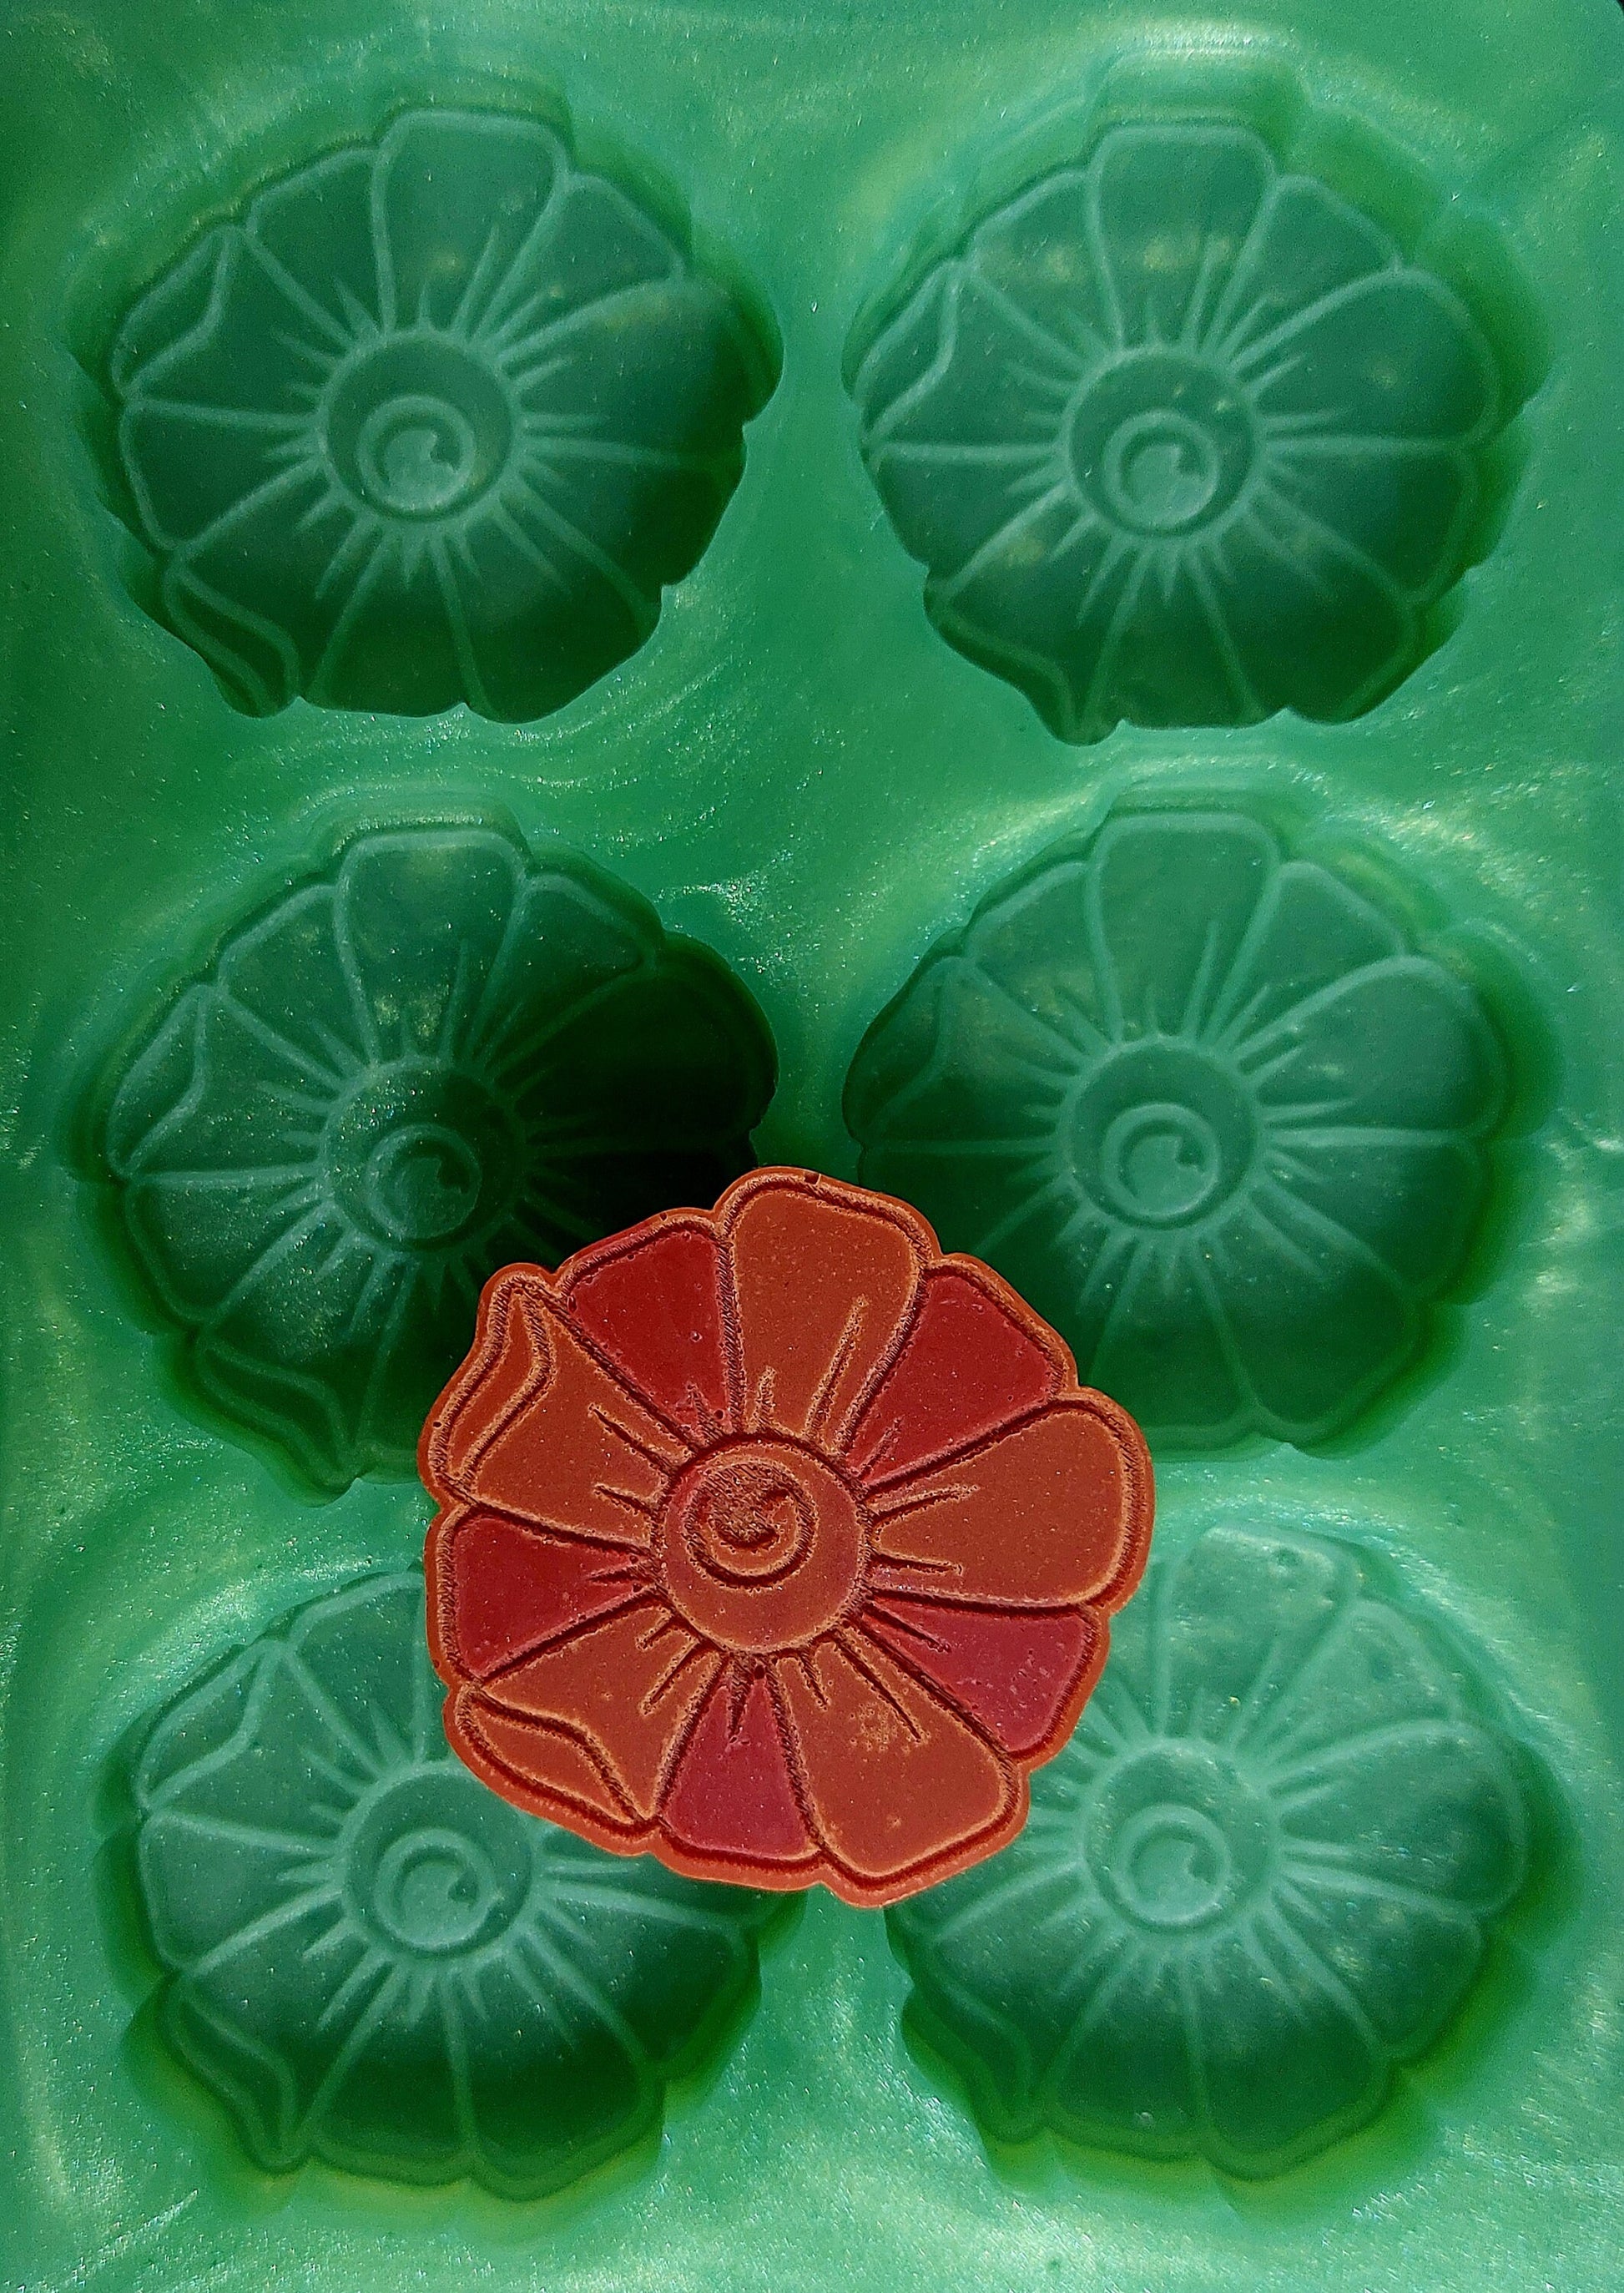 Eyeball Flower 6 Cell Silicone Mould for wax resin soap etc